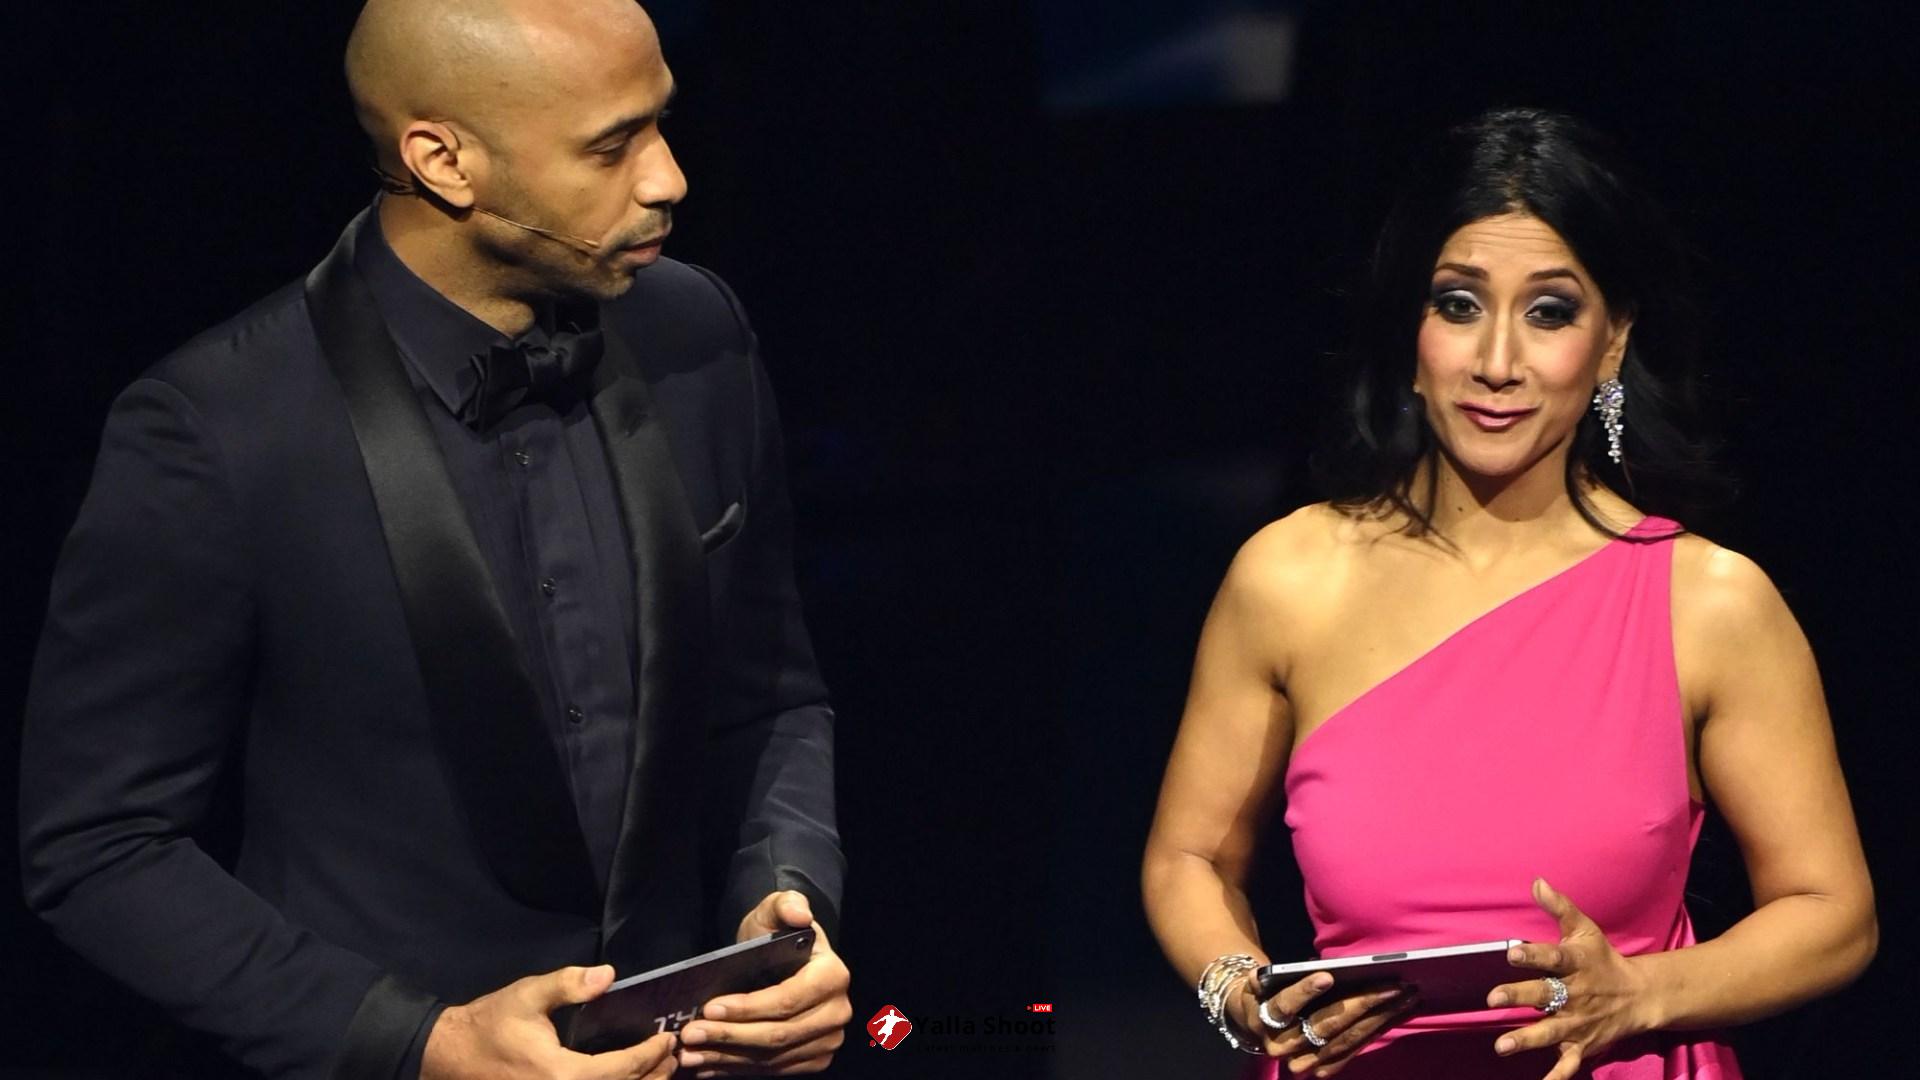 Arsenal legend Thierry Henry brutally trolls Tottenham at Fifa The Best awards as fans say ‘gotta love The King’